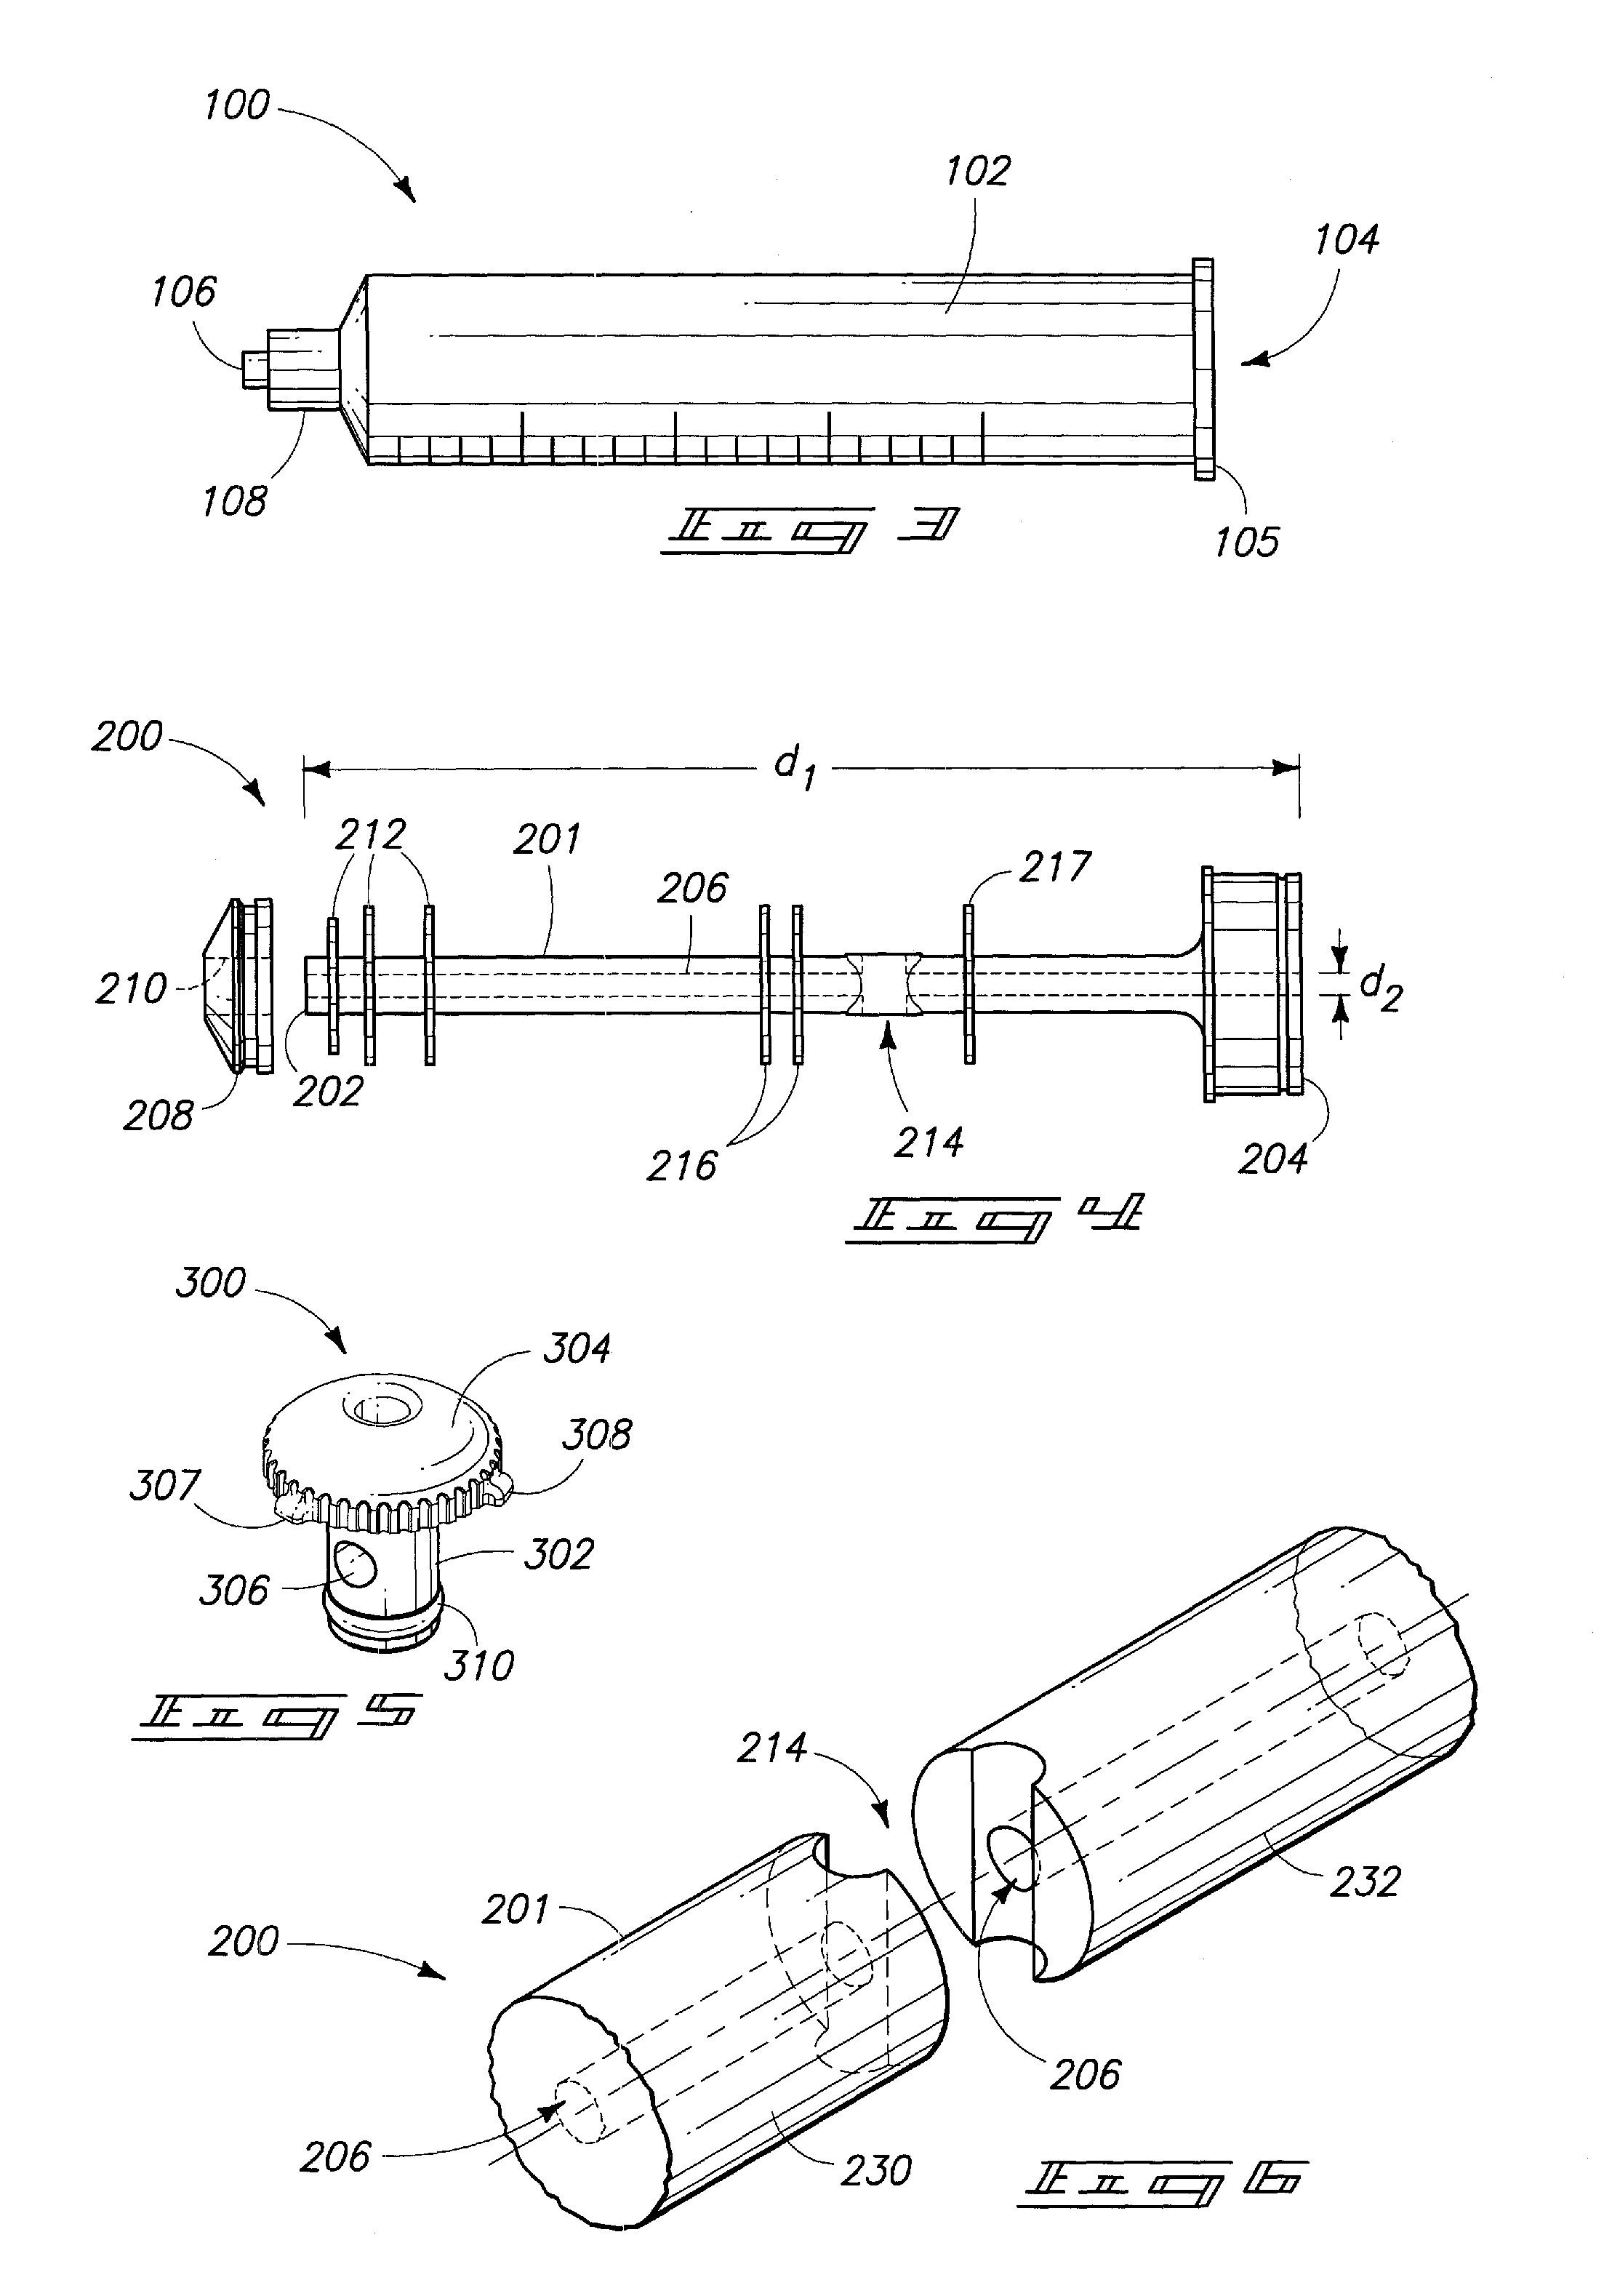 Syringe Devices and Methods for Mixing and Administering Medication